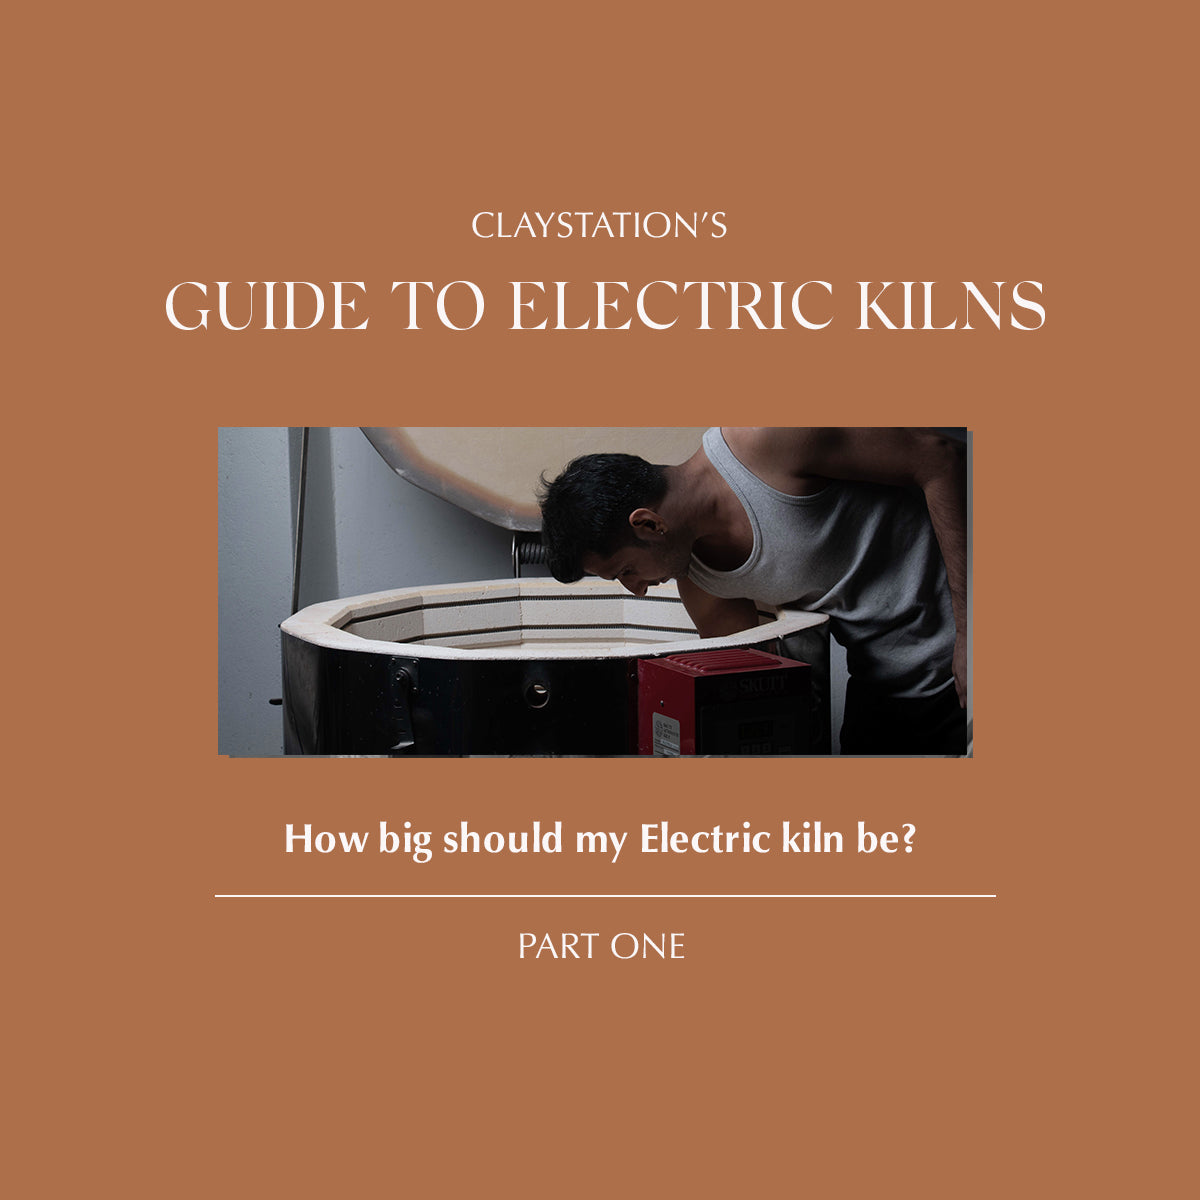 How big Should be your electric kiln?